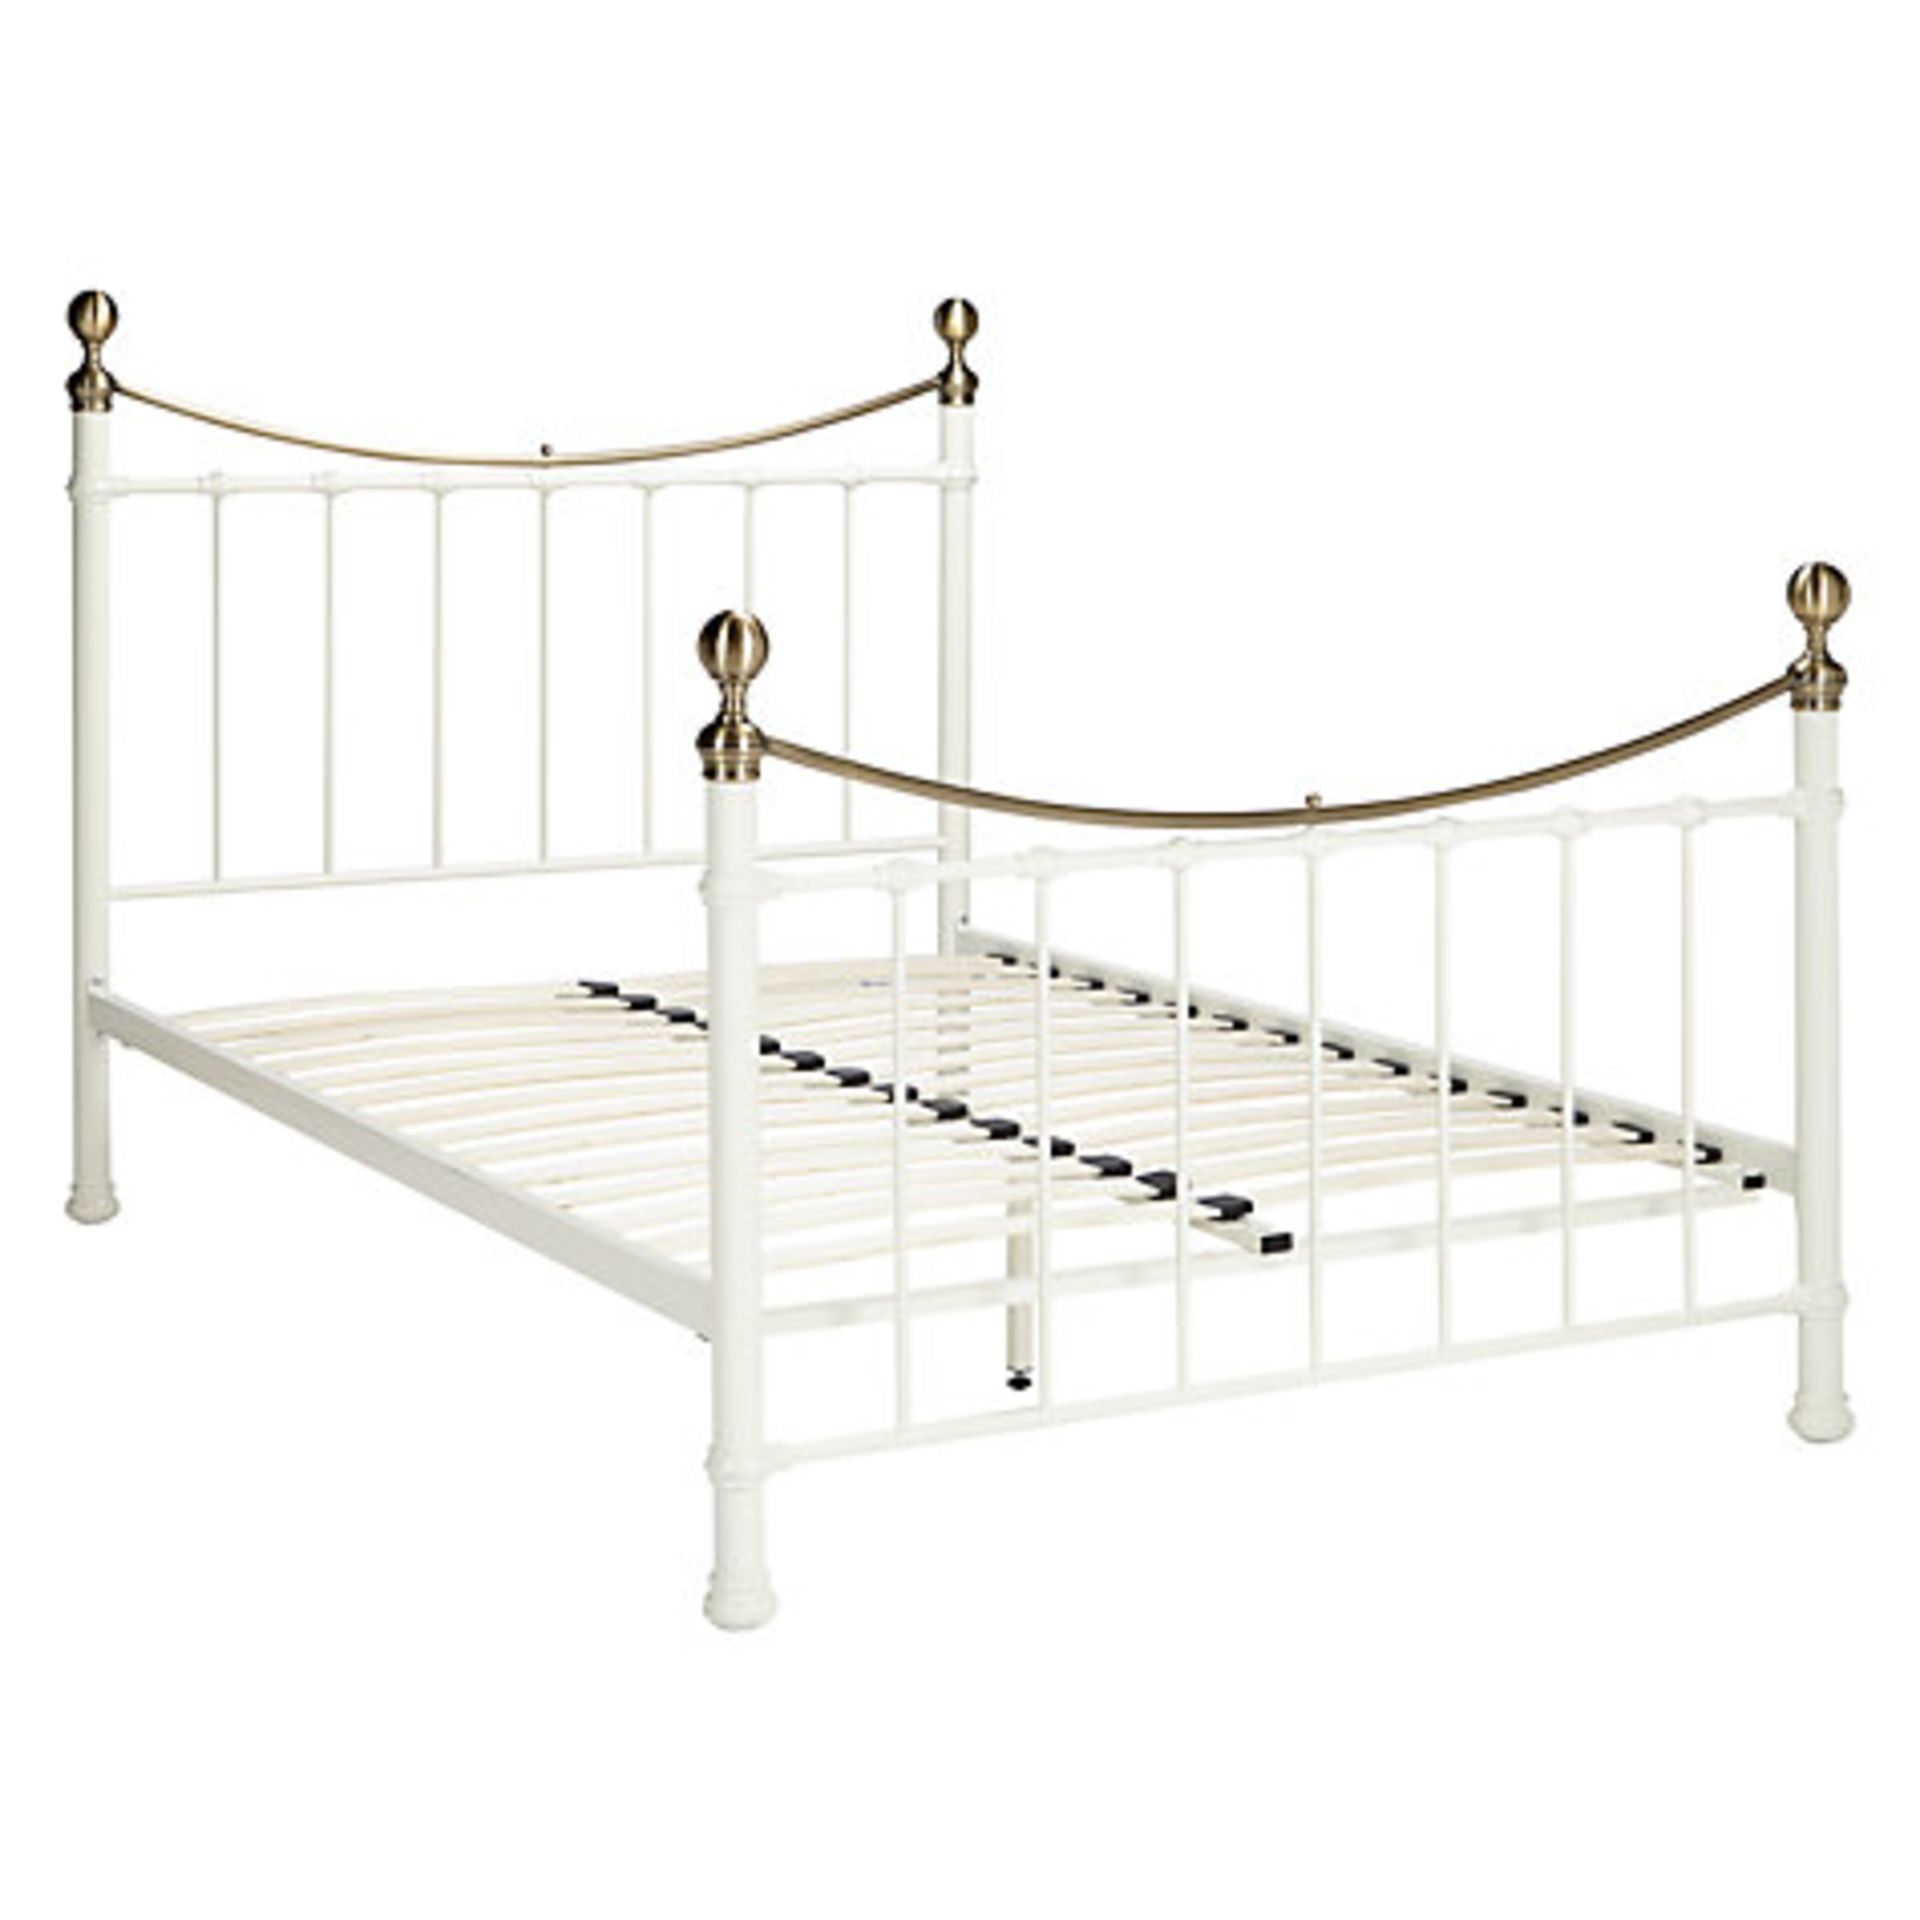 1 x BOXED 135CM JAYNE METAL BED IN WHITE *PLEASE NOTE THAT THE BID PRICE IS MULTIPLIED BY THE NUMBER